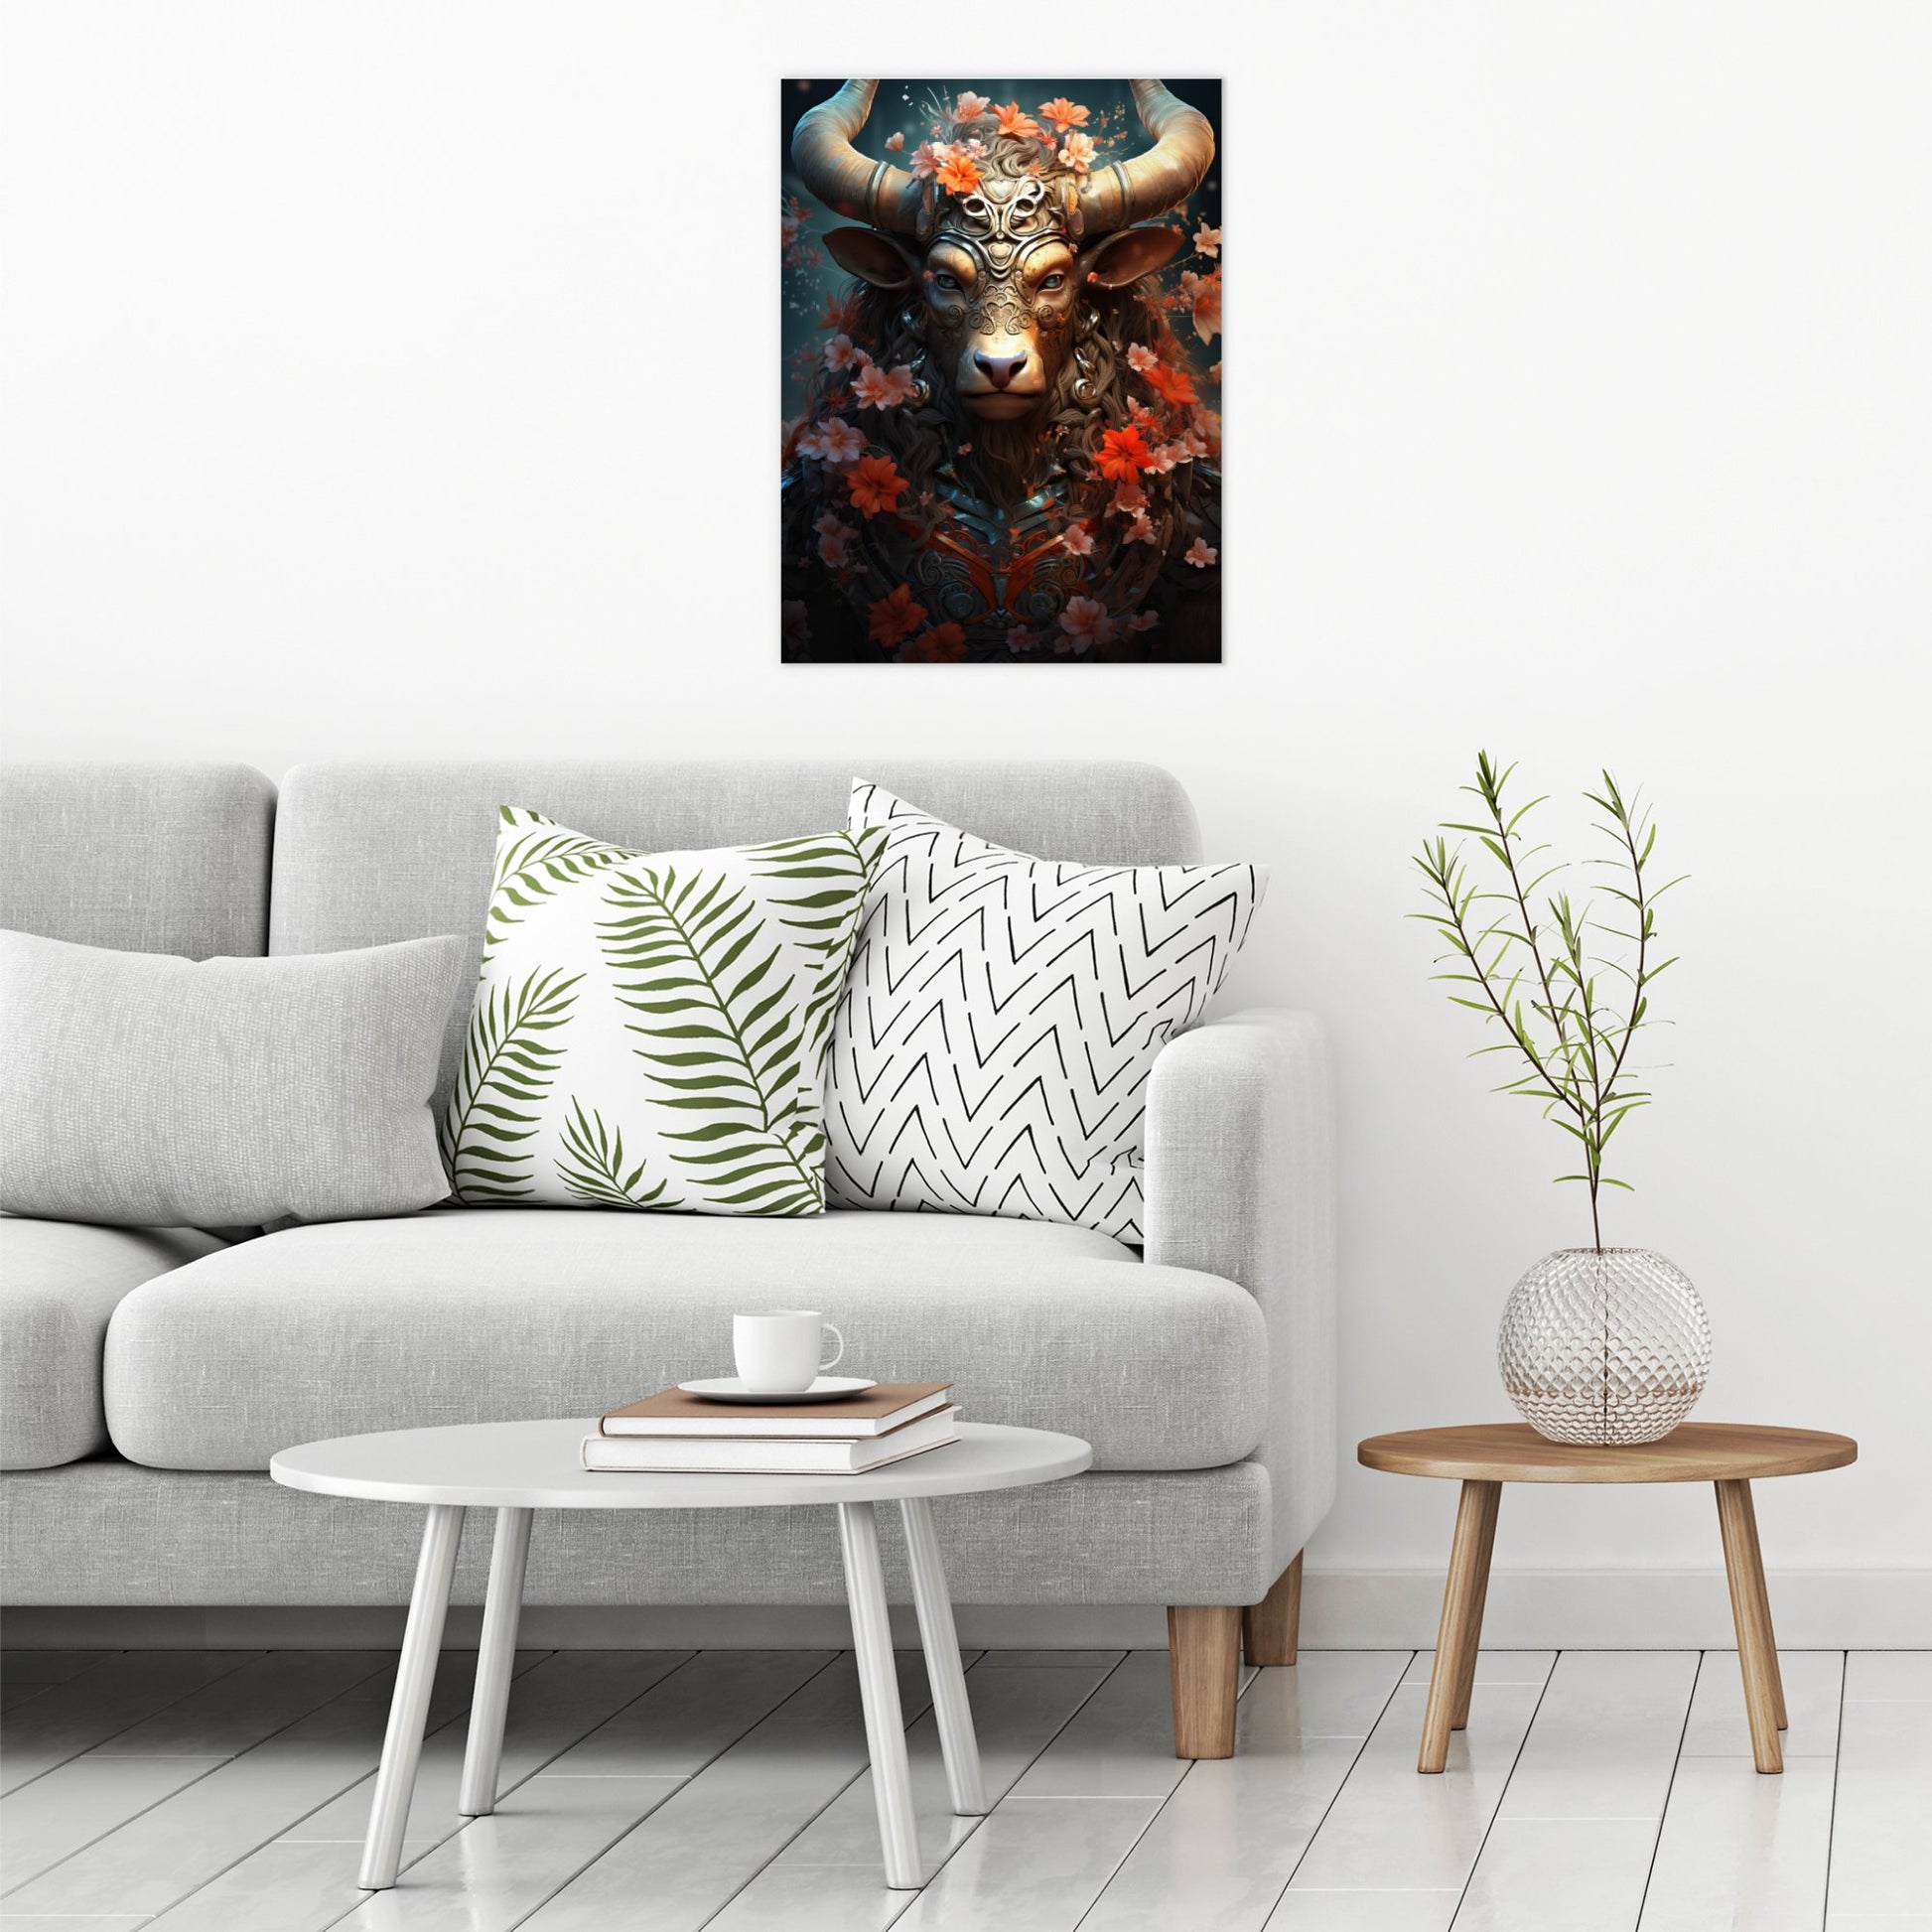 A contemporary modern room view showing a large size metal art poster display plate with printed design of a Magical Minotaur Fantasy Painting